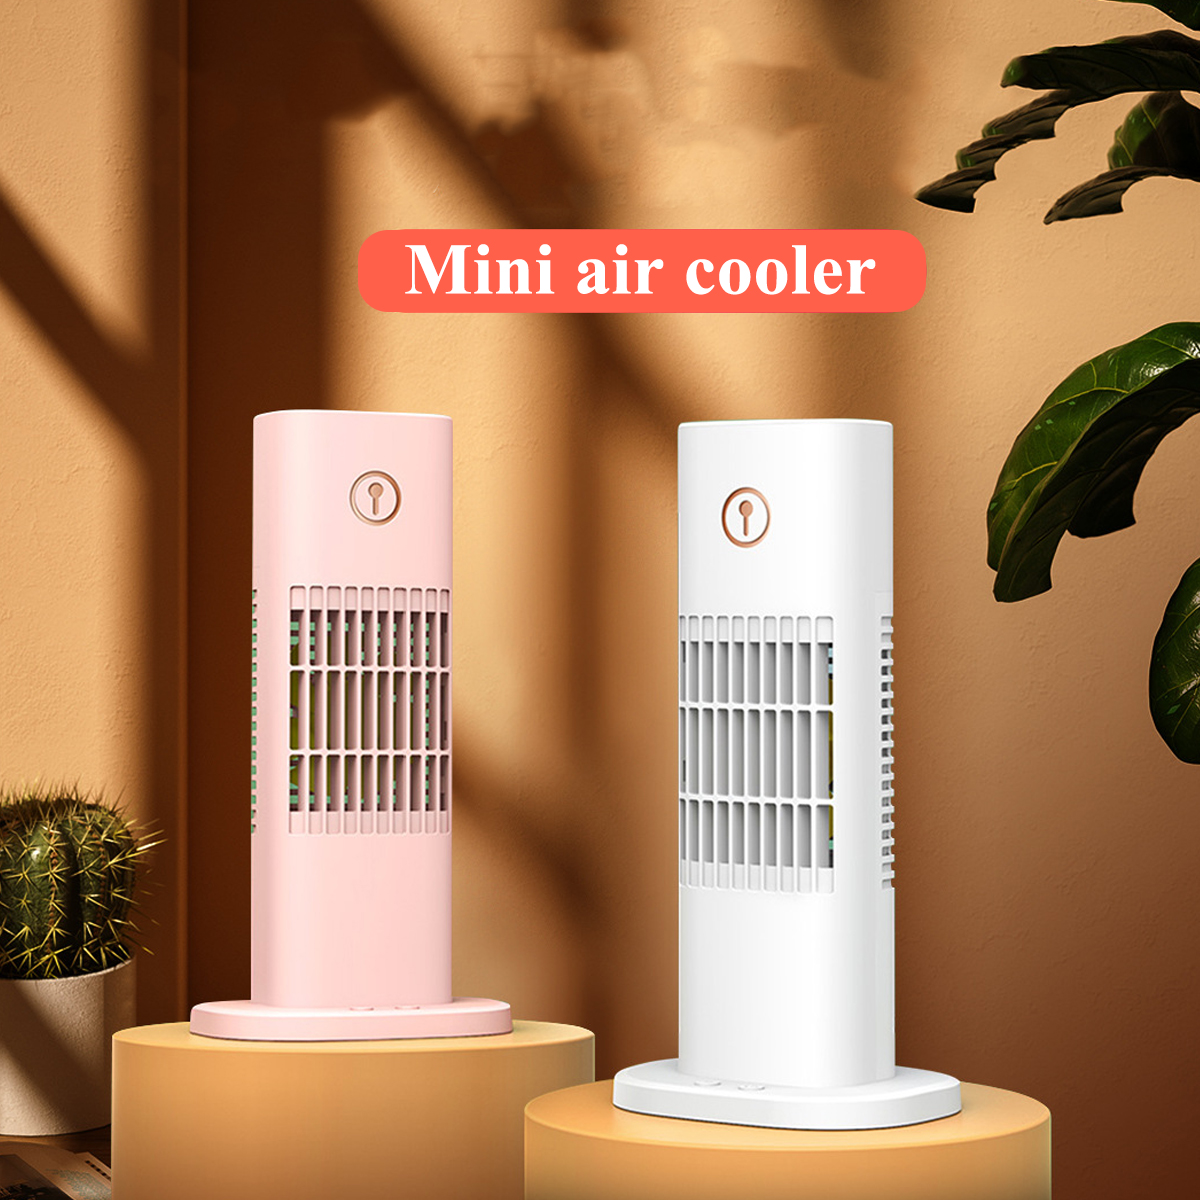 Bakeey 3 Gear Mini Water Cooling Fan Spray Humidification Portable Air Cooler Table Fan